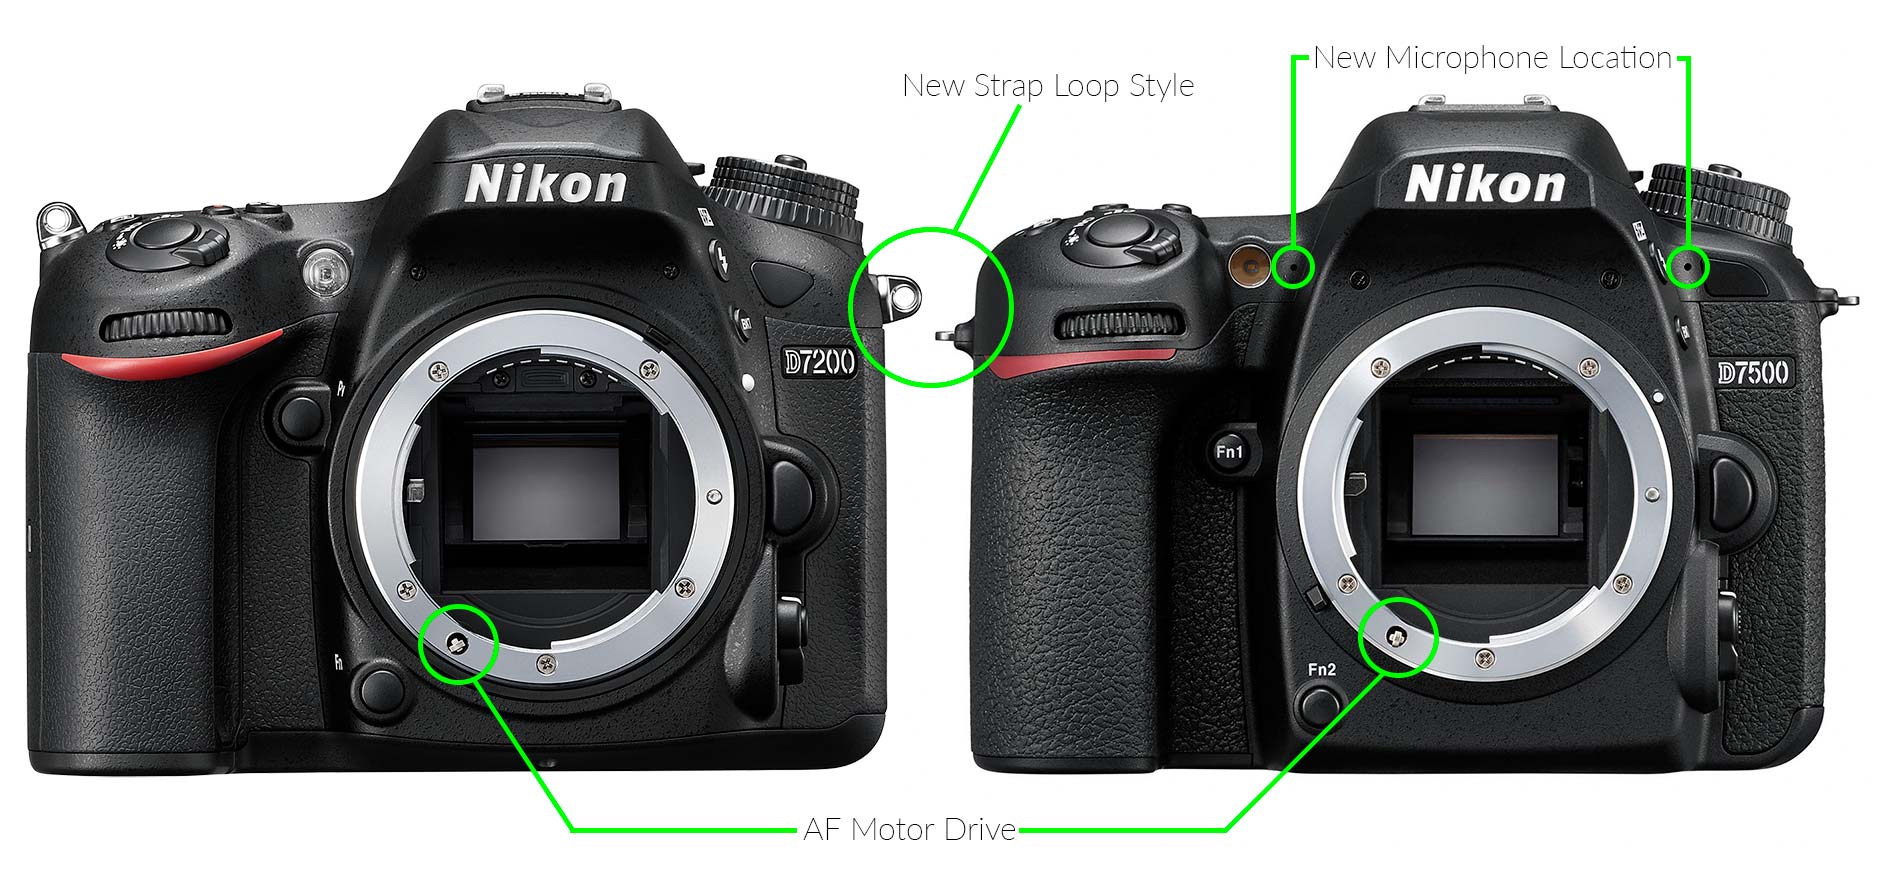 Nikon D7500 vs D7200: 8 key differences you need to know